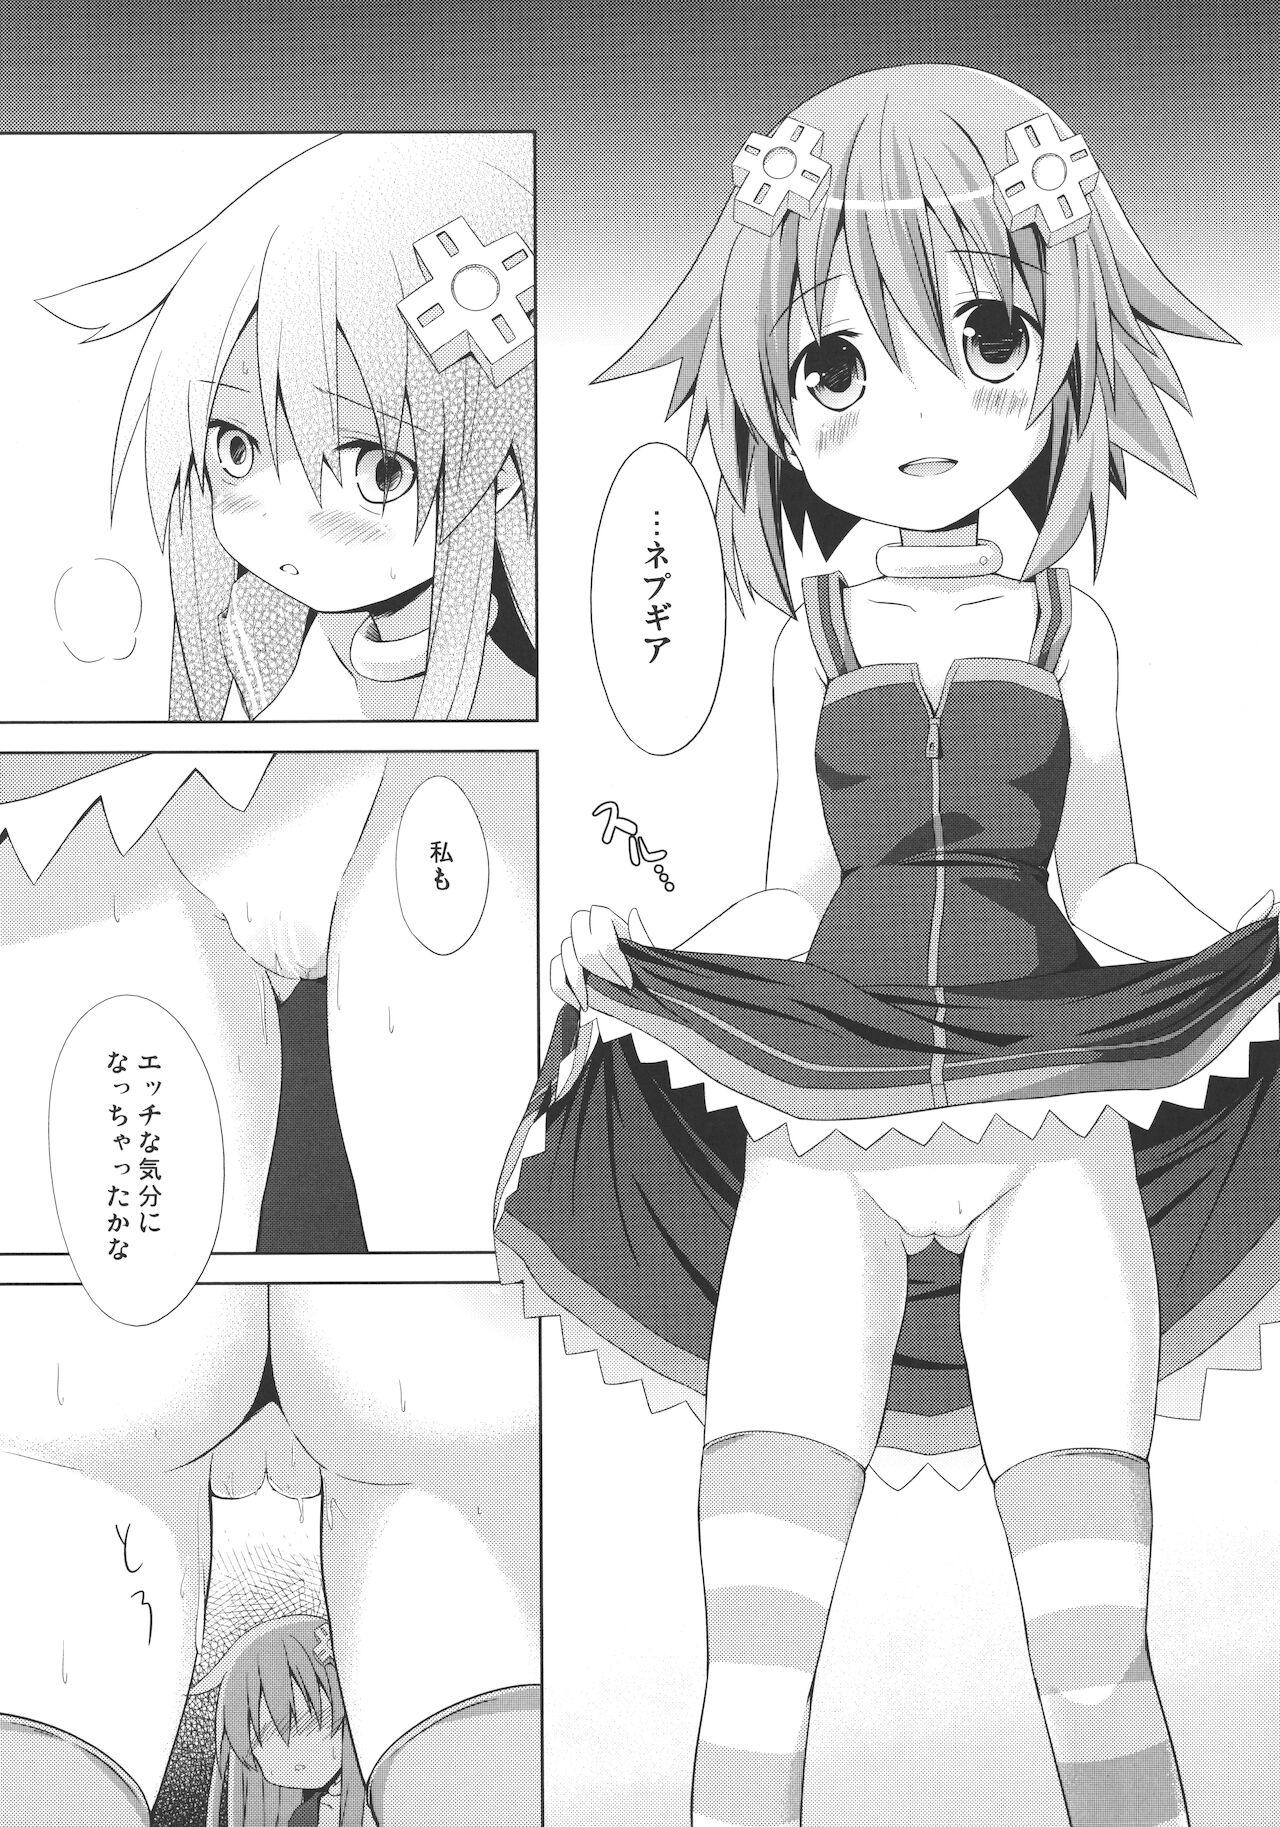 A certain Nepgear was harmed in the making of this doujinshi 10